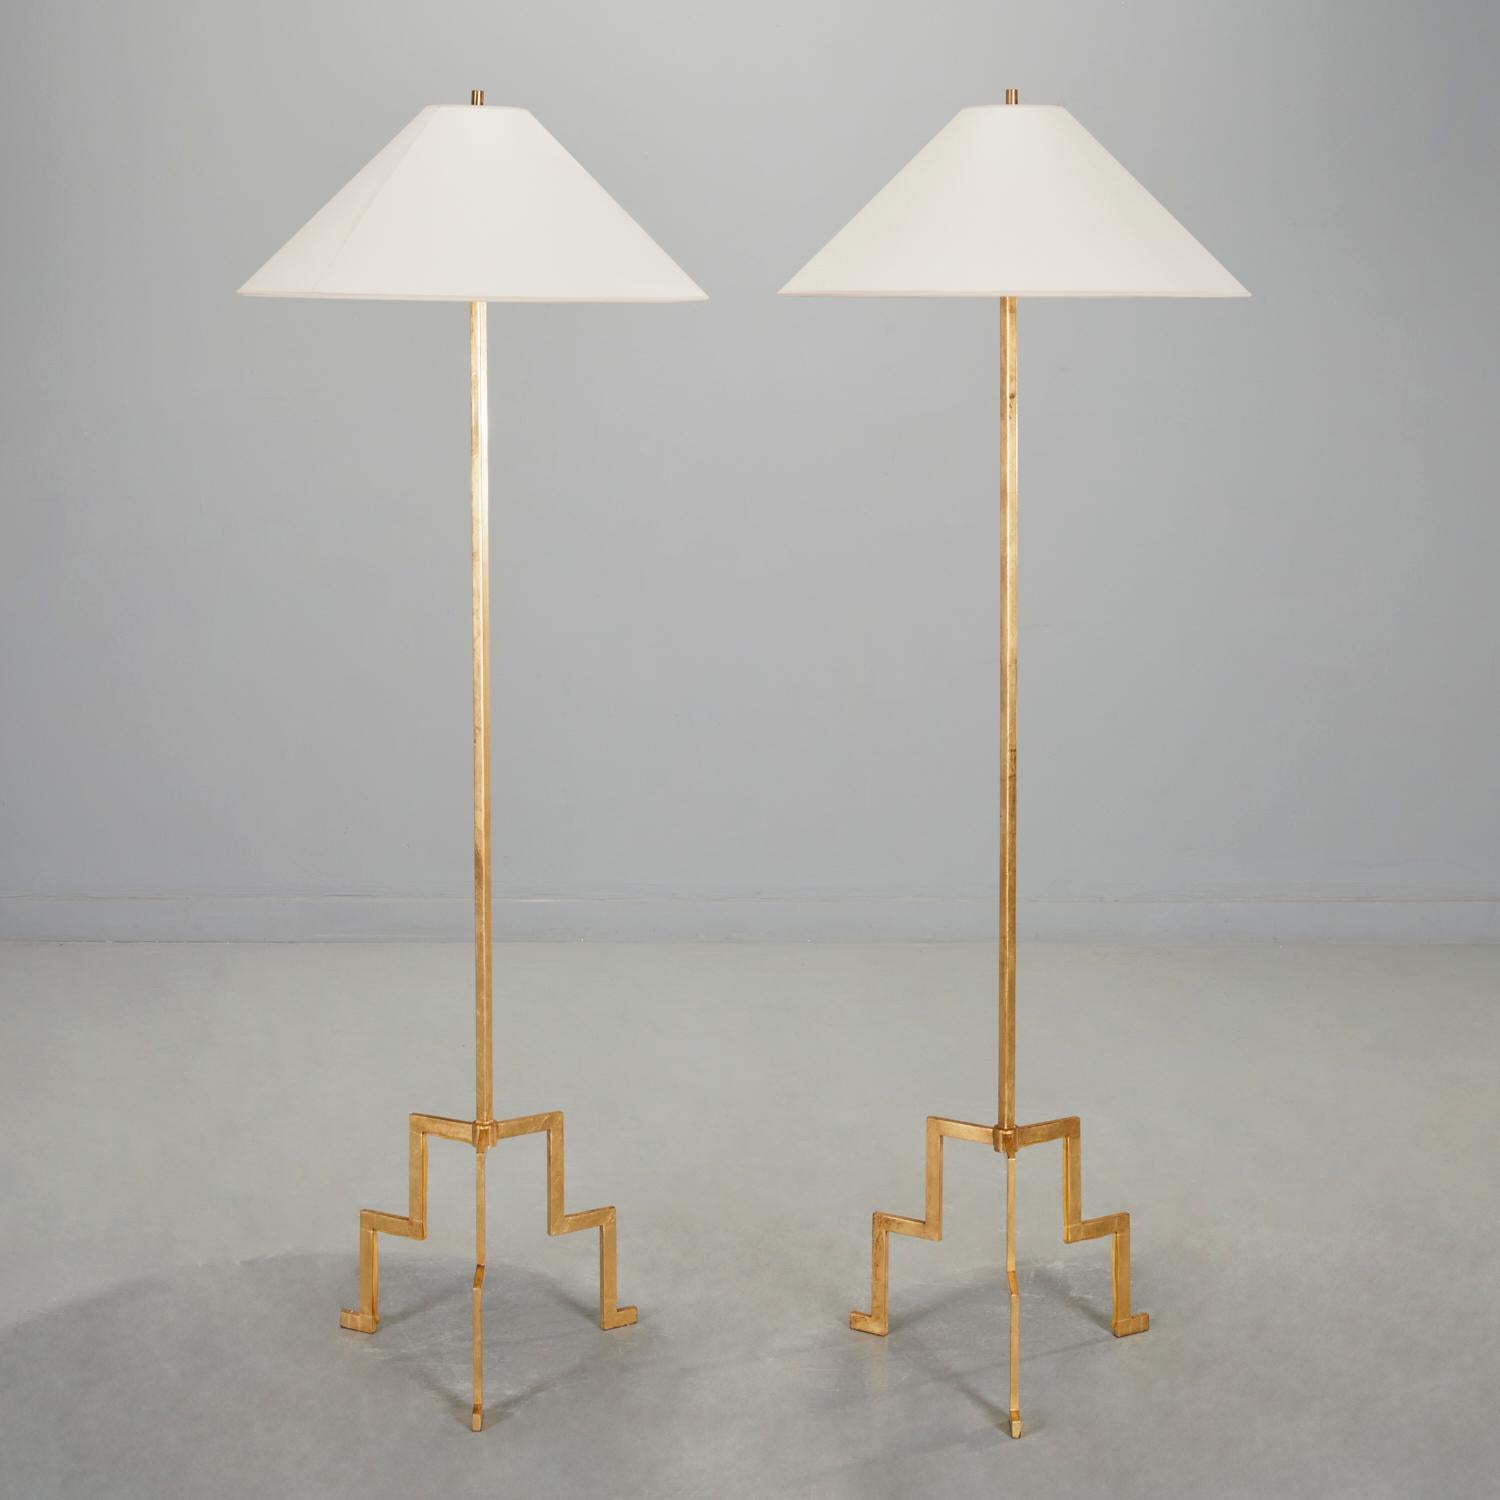 Contemporary J. Randall Powers for Visual Comfort - Gilded Iron Tripod Floor Lamp with Shade